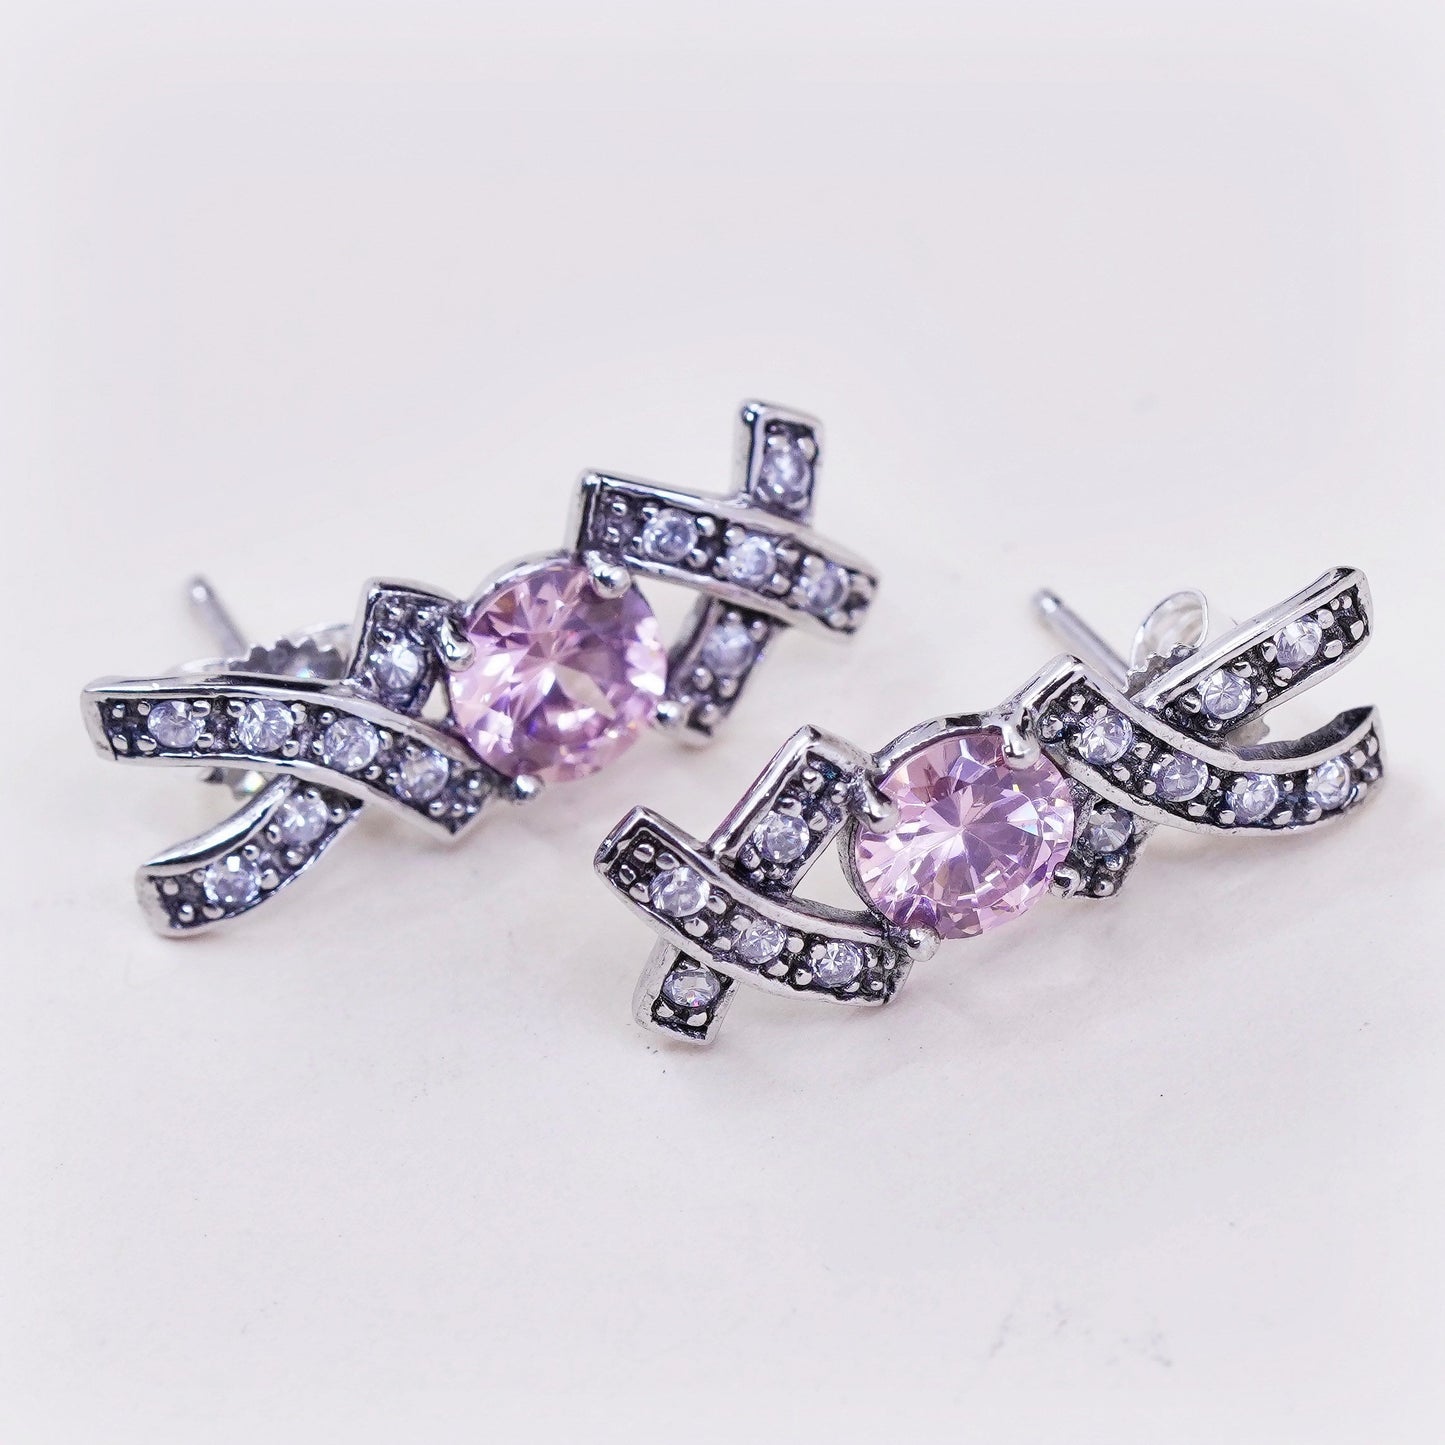 Vintage sterling silver handmade earrings, 925 XOX studs with and pink Cz